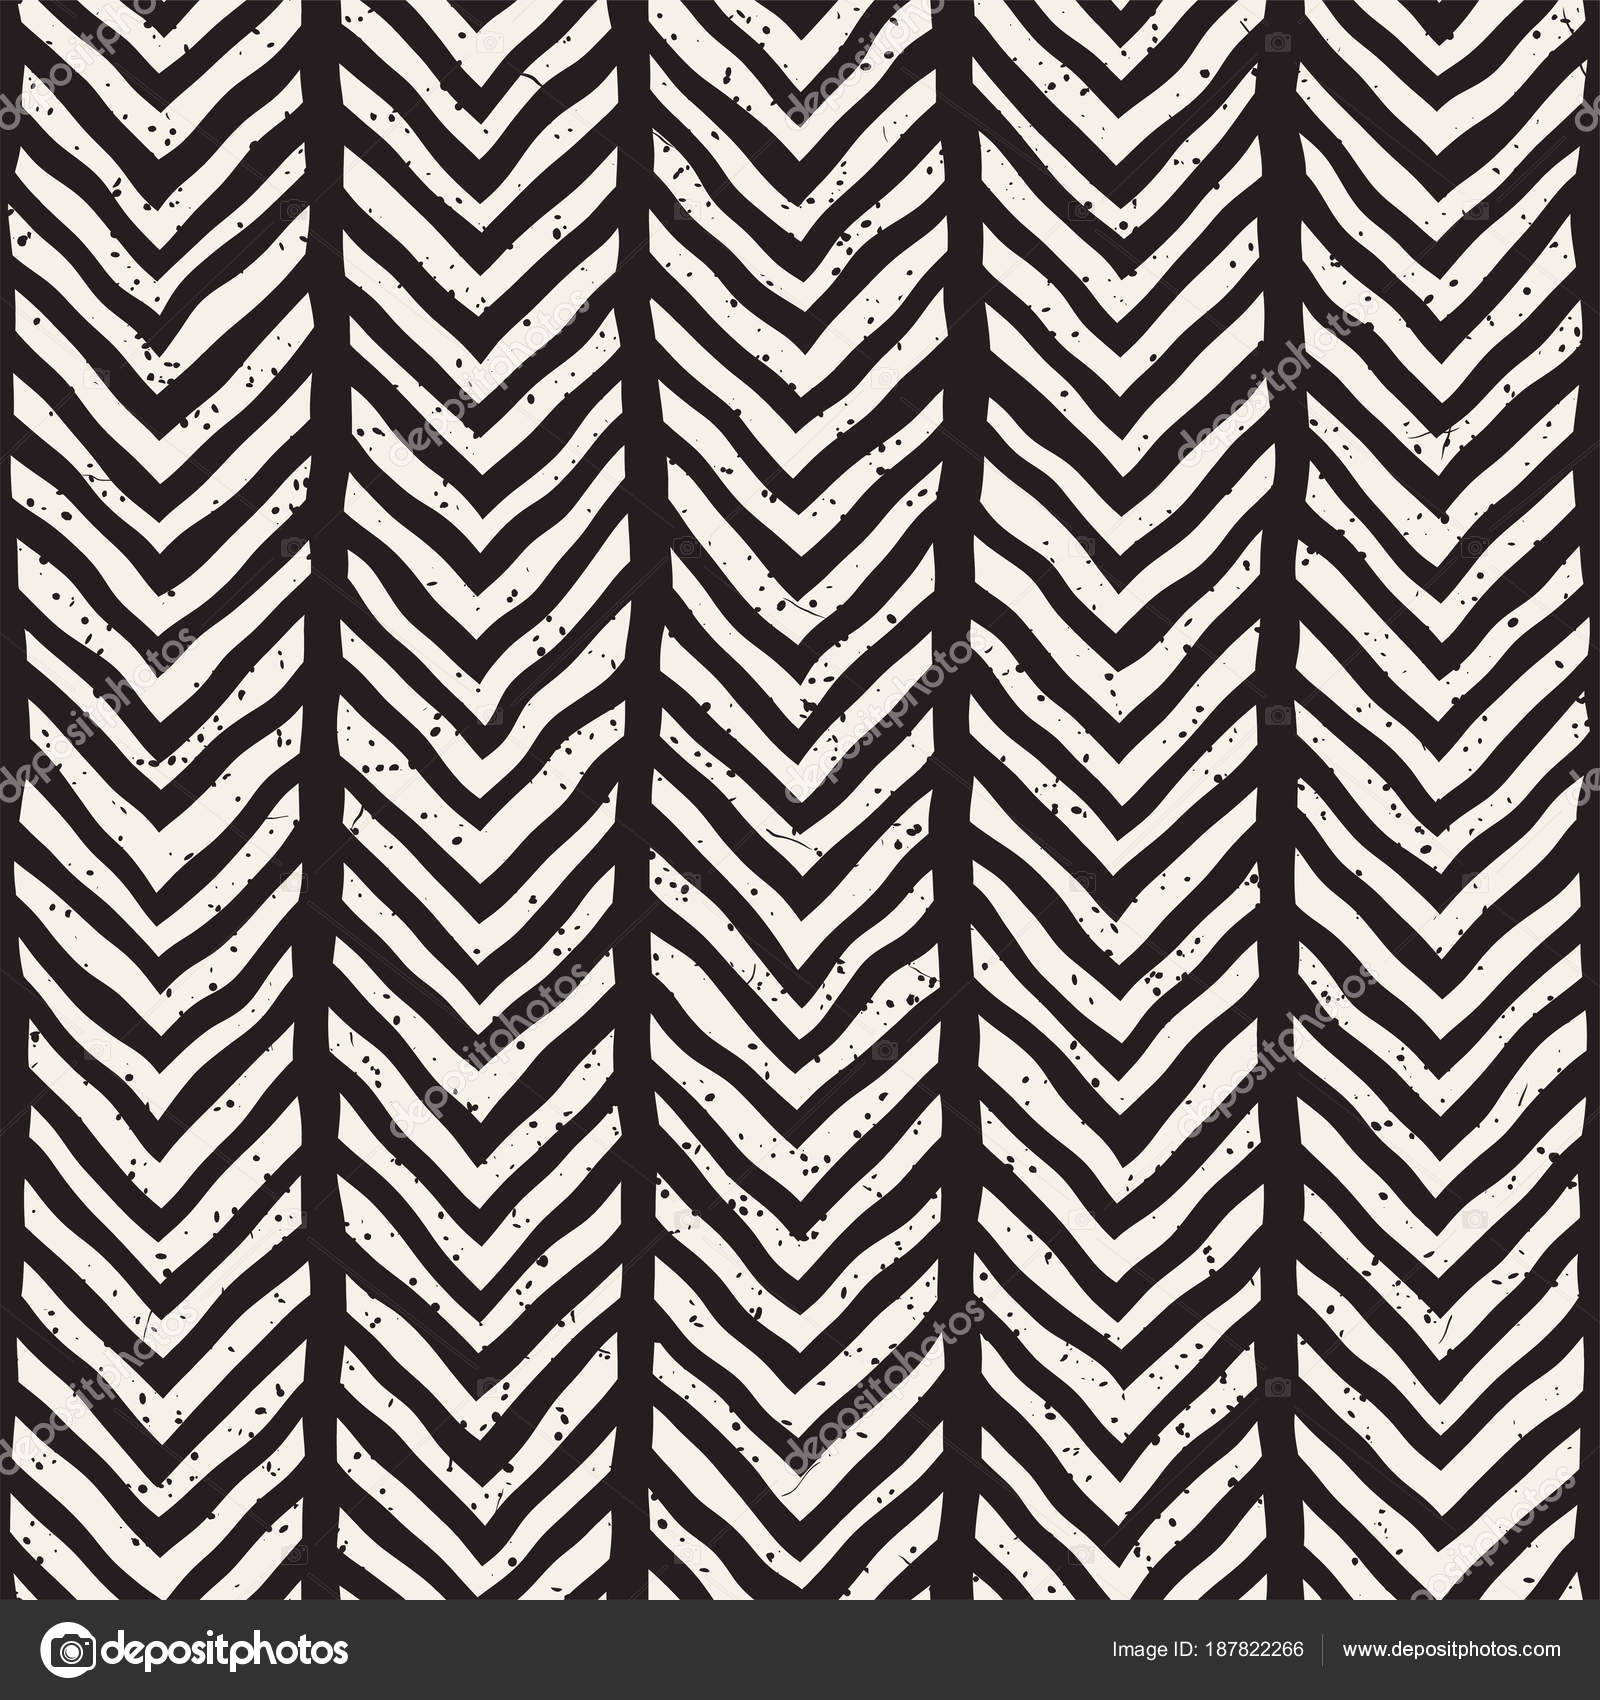 Simple Ink Geometric Pattern Monochrome Black And White Strokes Background Hand Drawn Texture For Your Design Stock Vector C Samolevsky 187822266